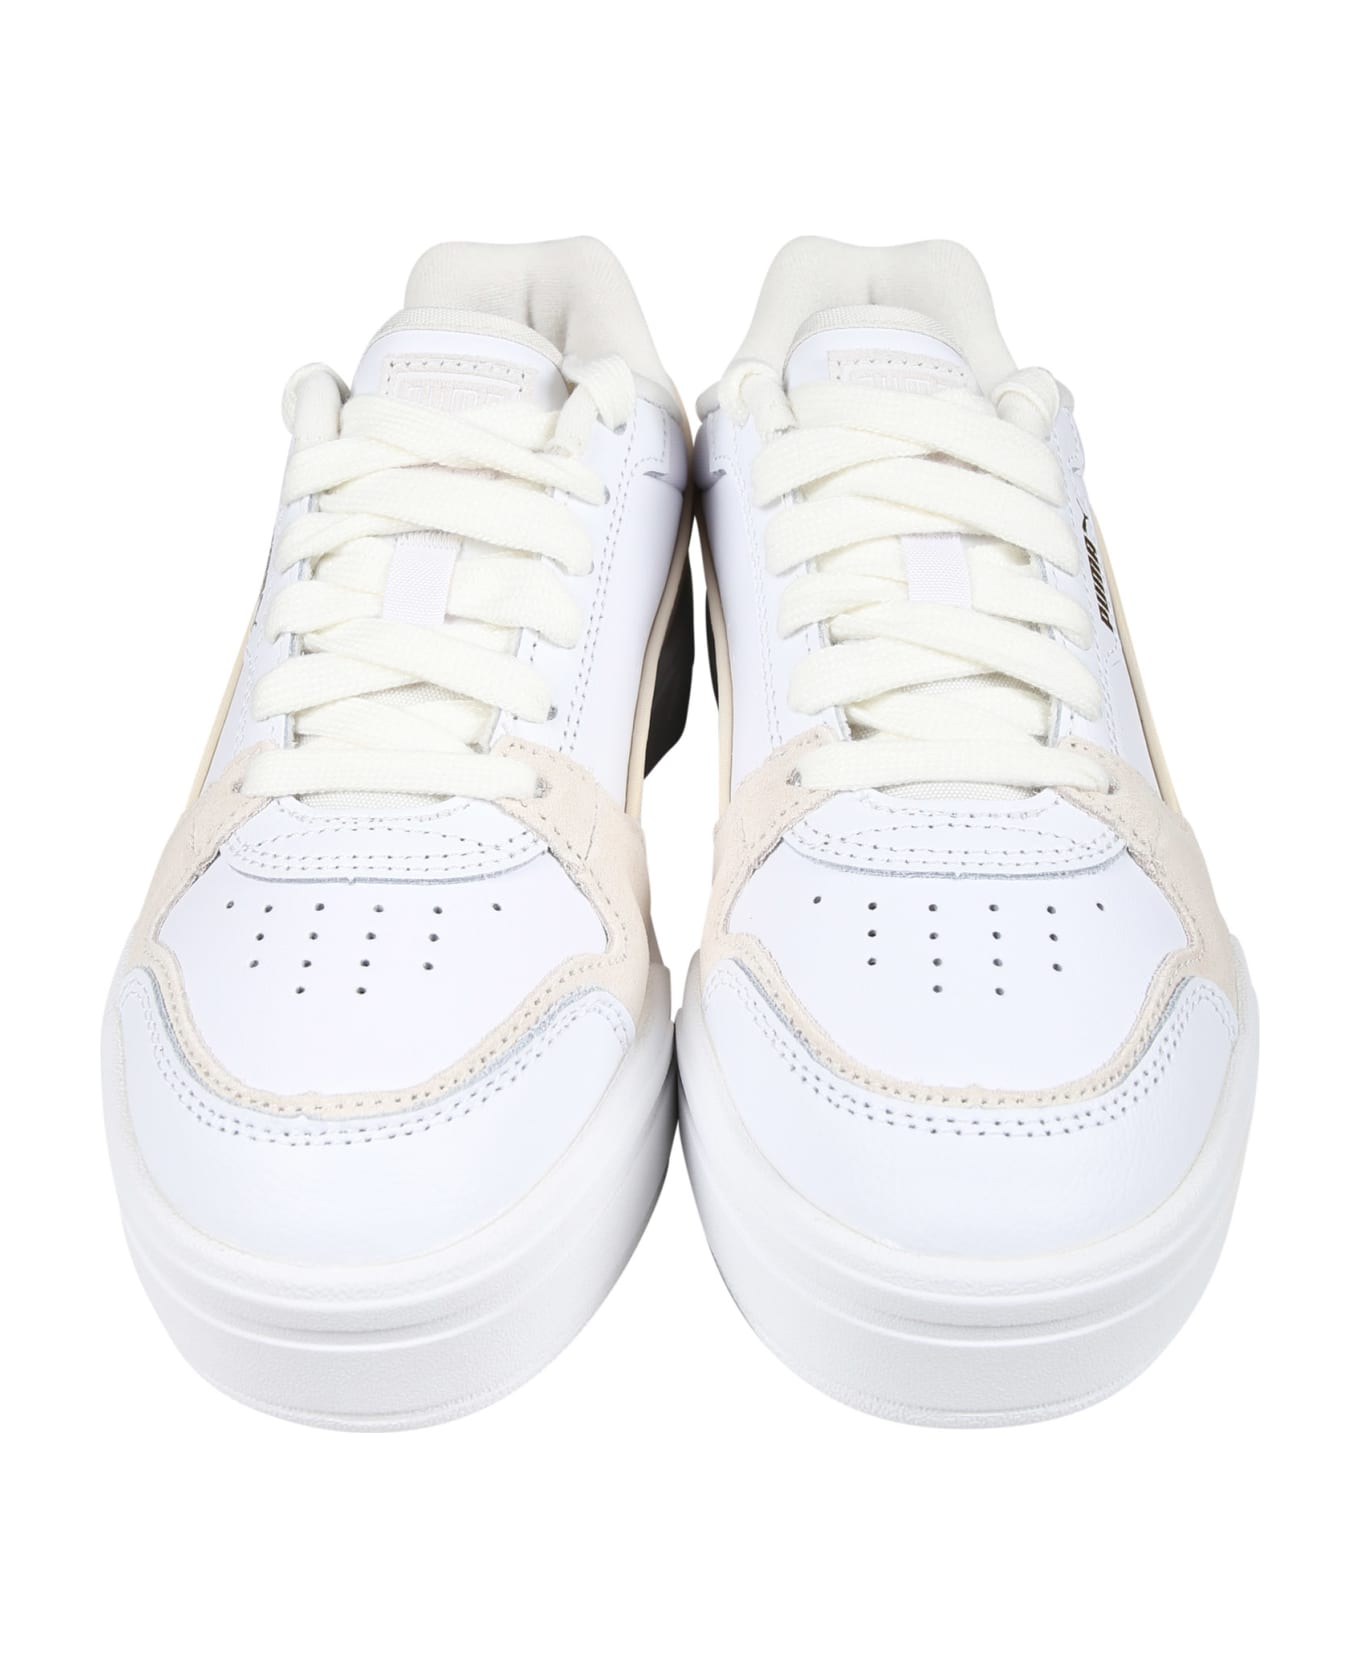 Puma Ca Pro Lux Iii White Low Sneakers For Kids - White